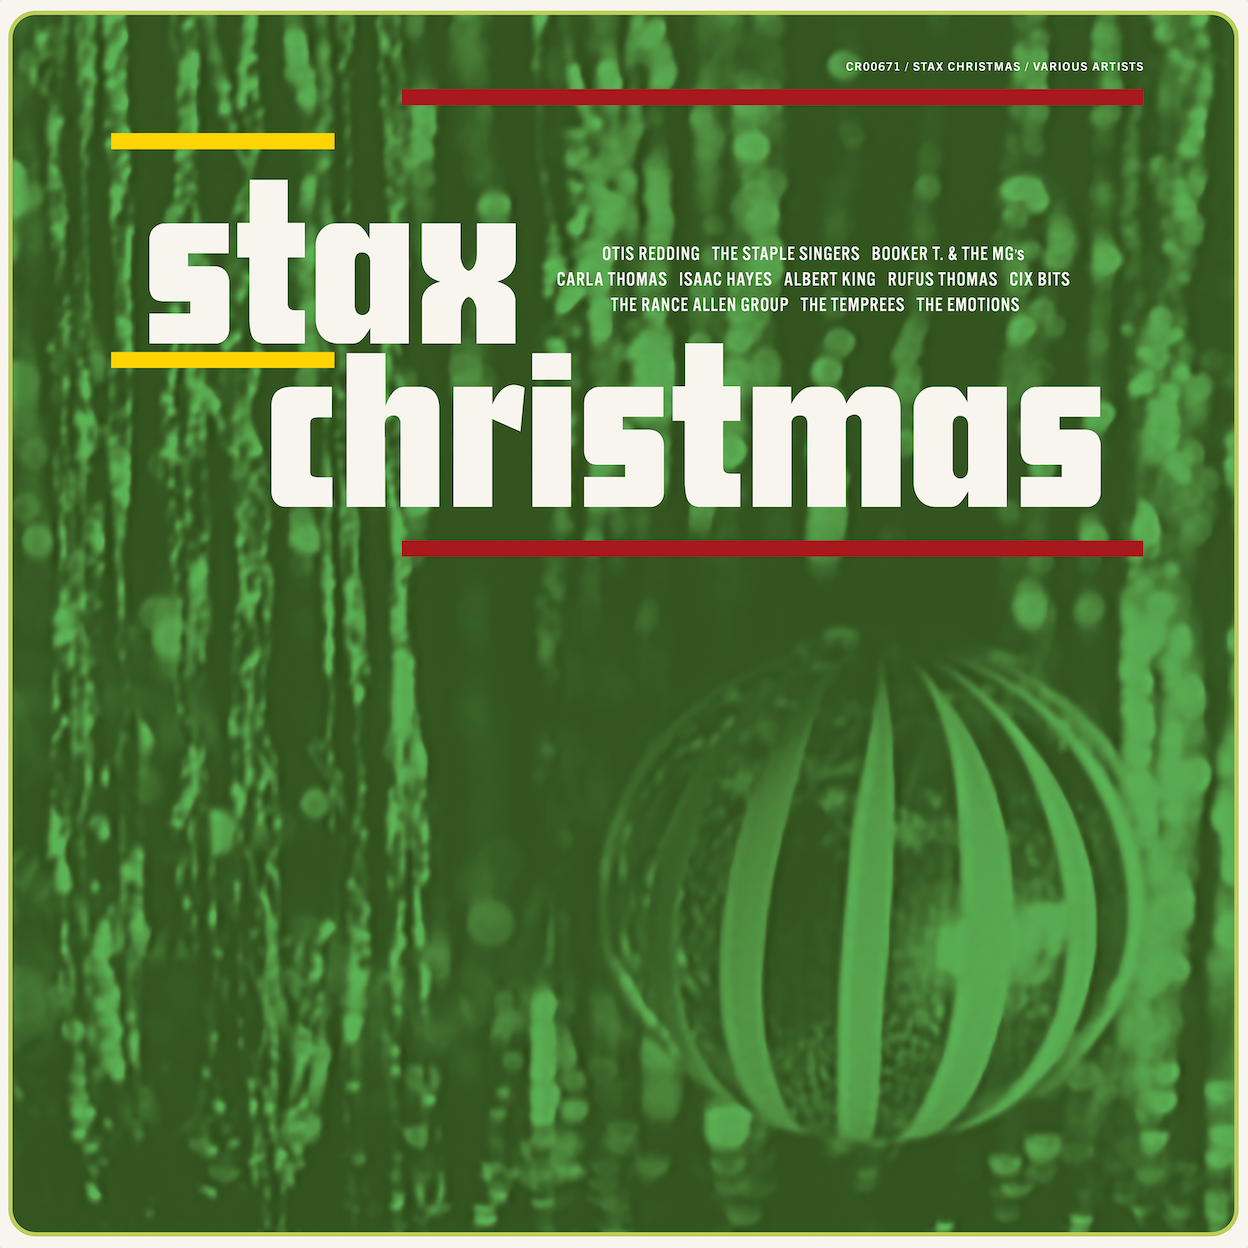 CELEBRATE THE HOLIDAYS WITH STAX CHRISTMAS!